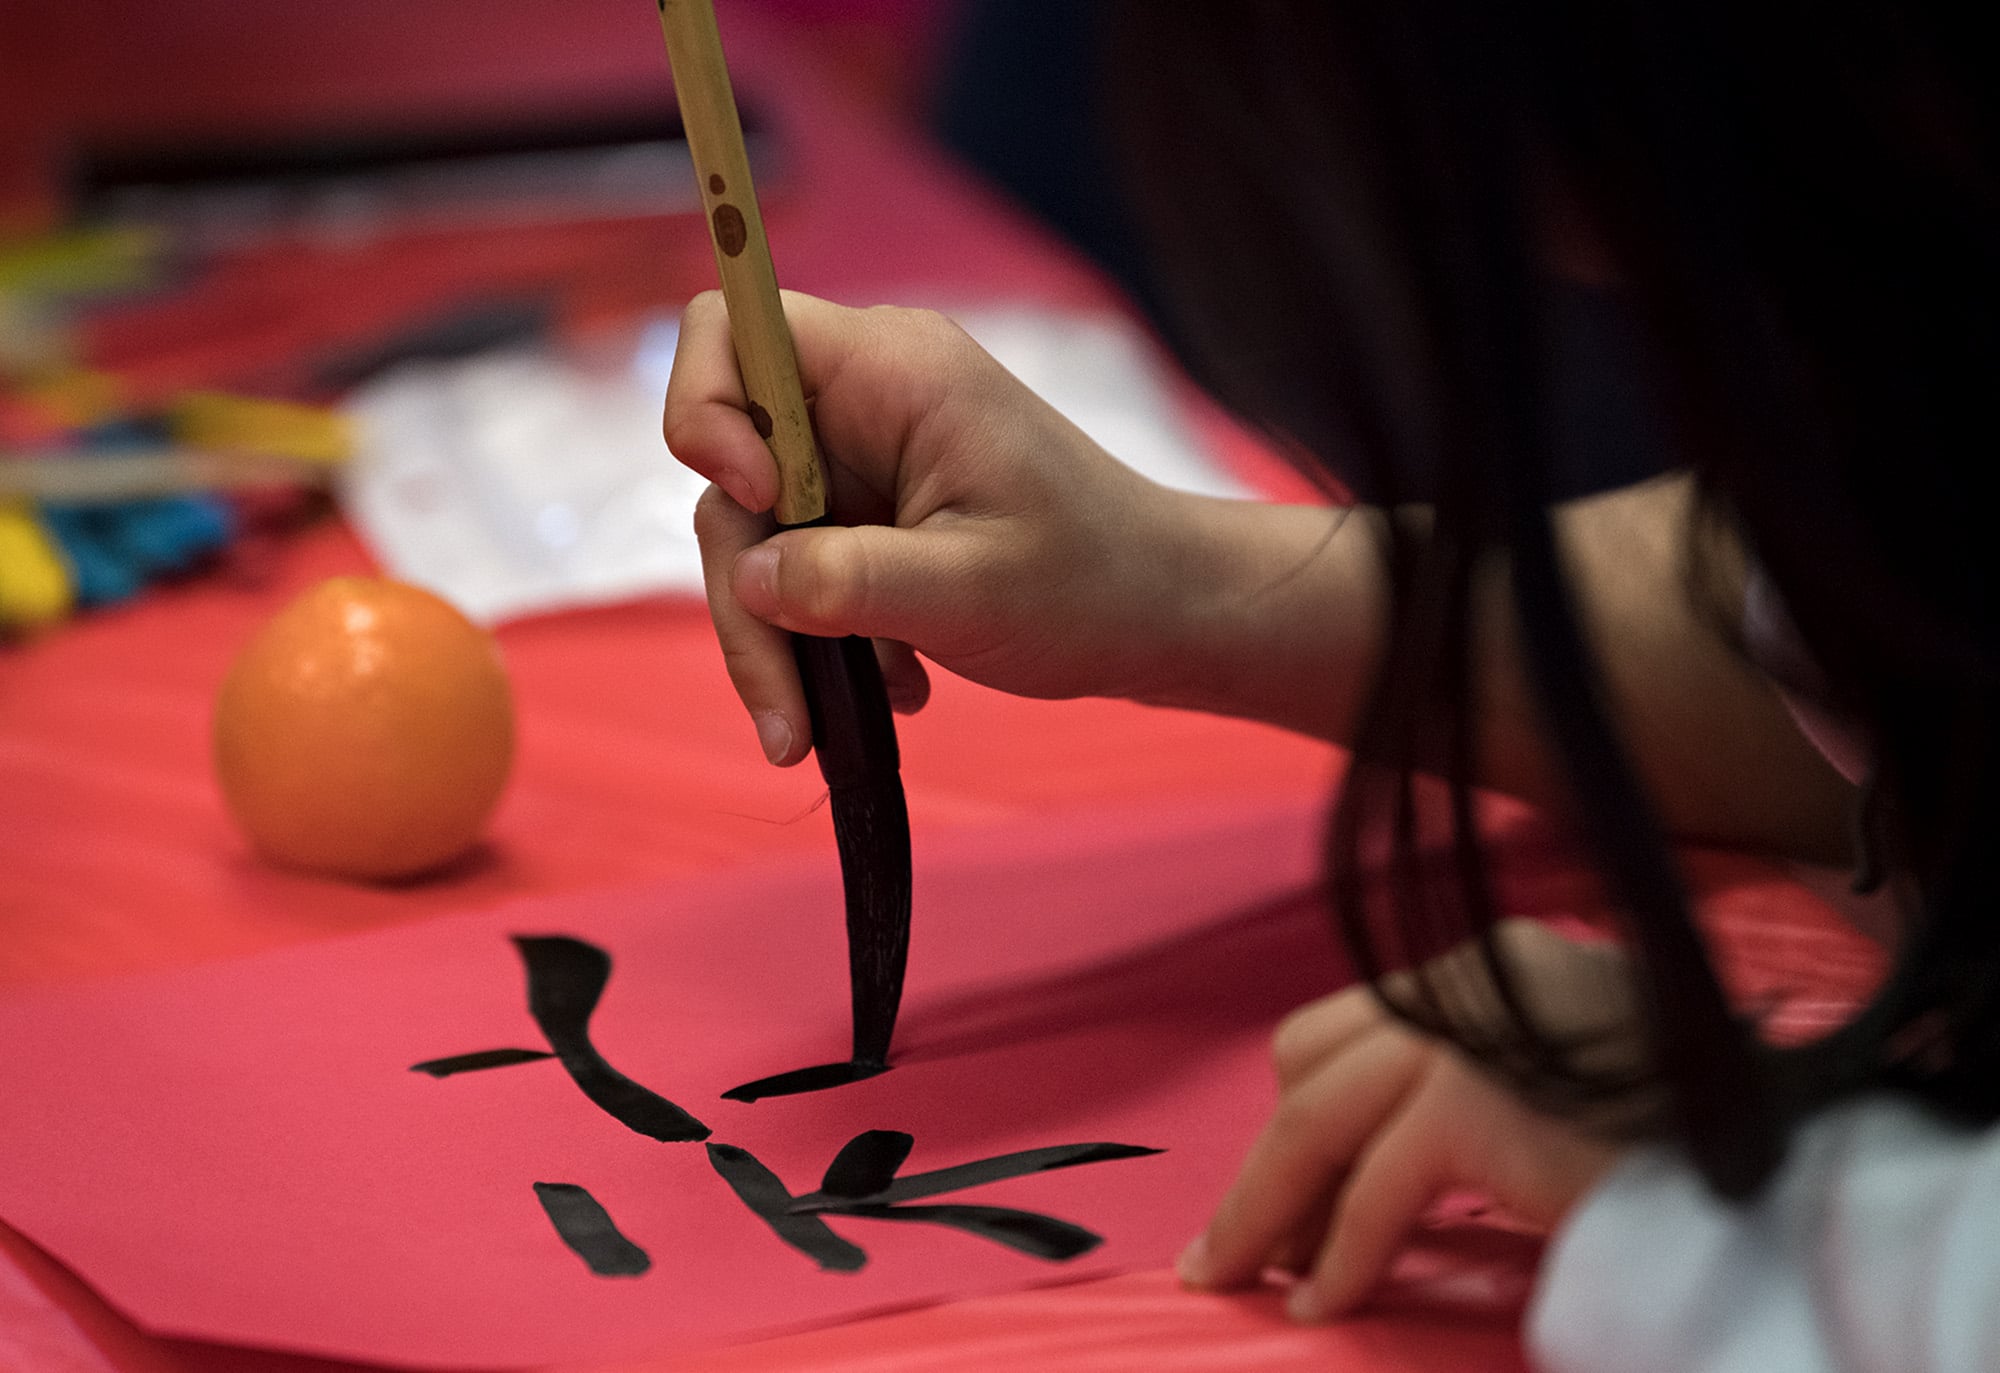 A young participant practices her calligraphy during the Lunar New Year celebration at Washington State University Vancouver on Wednesday afternoon, Feb. 20, 2019.